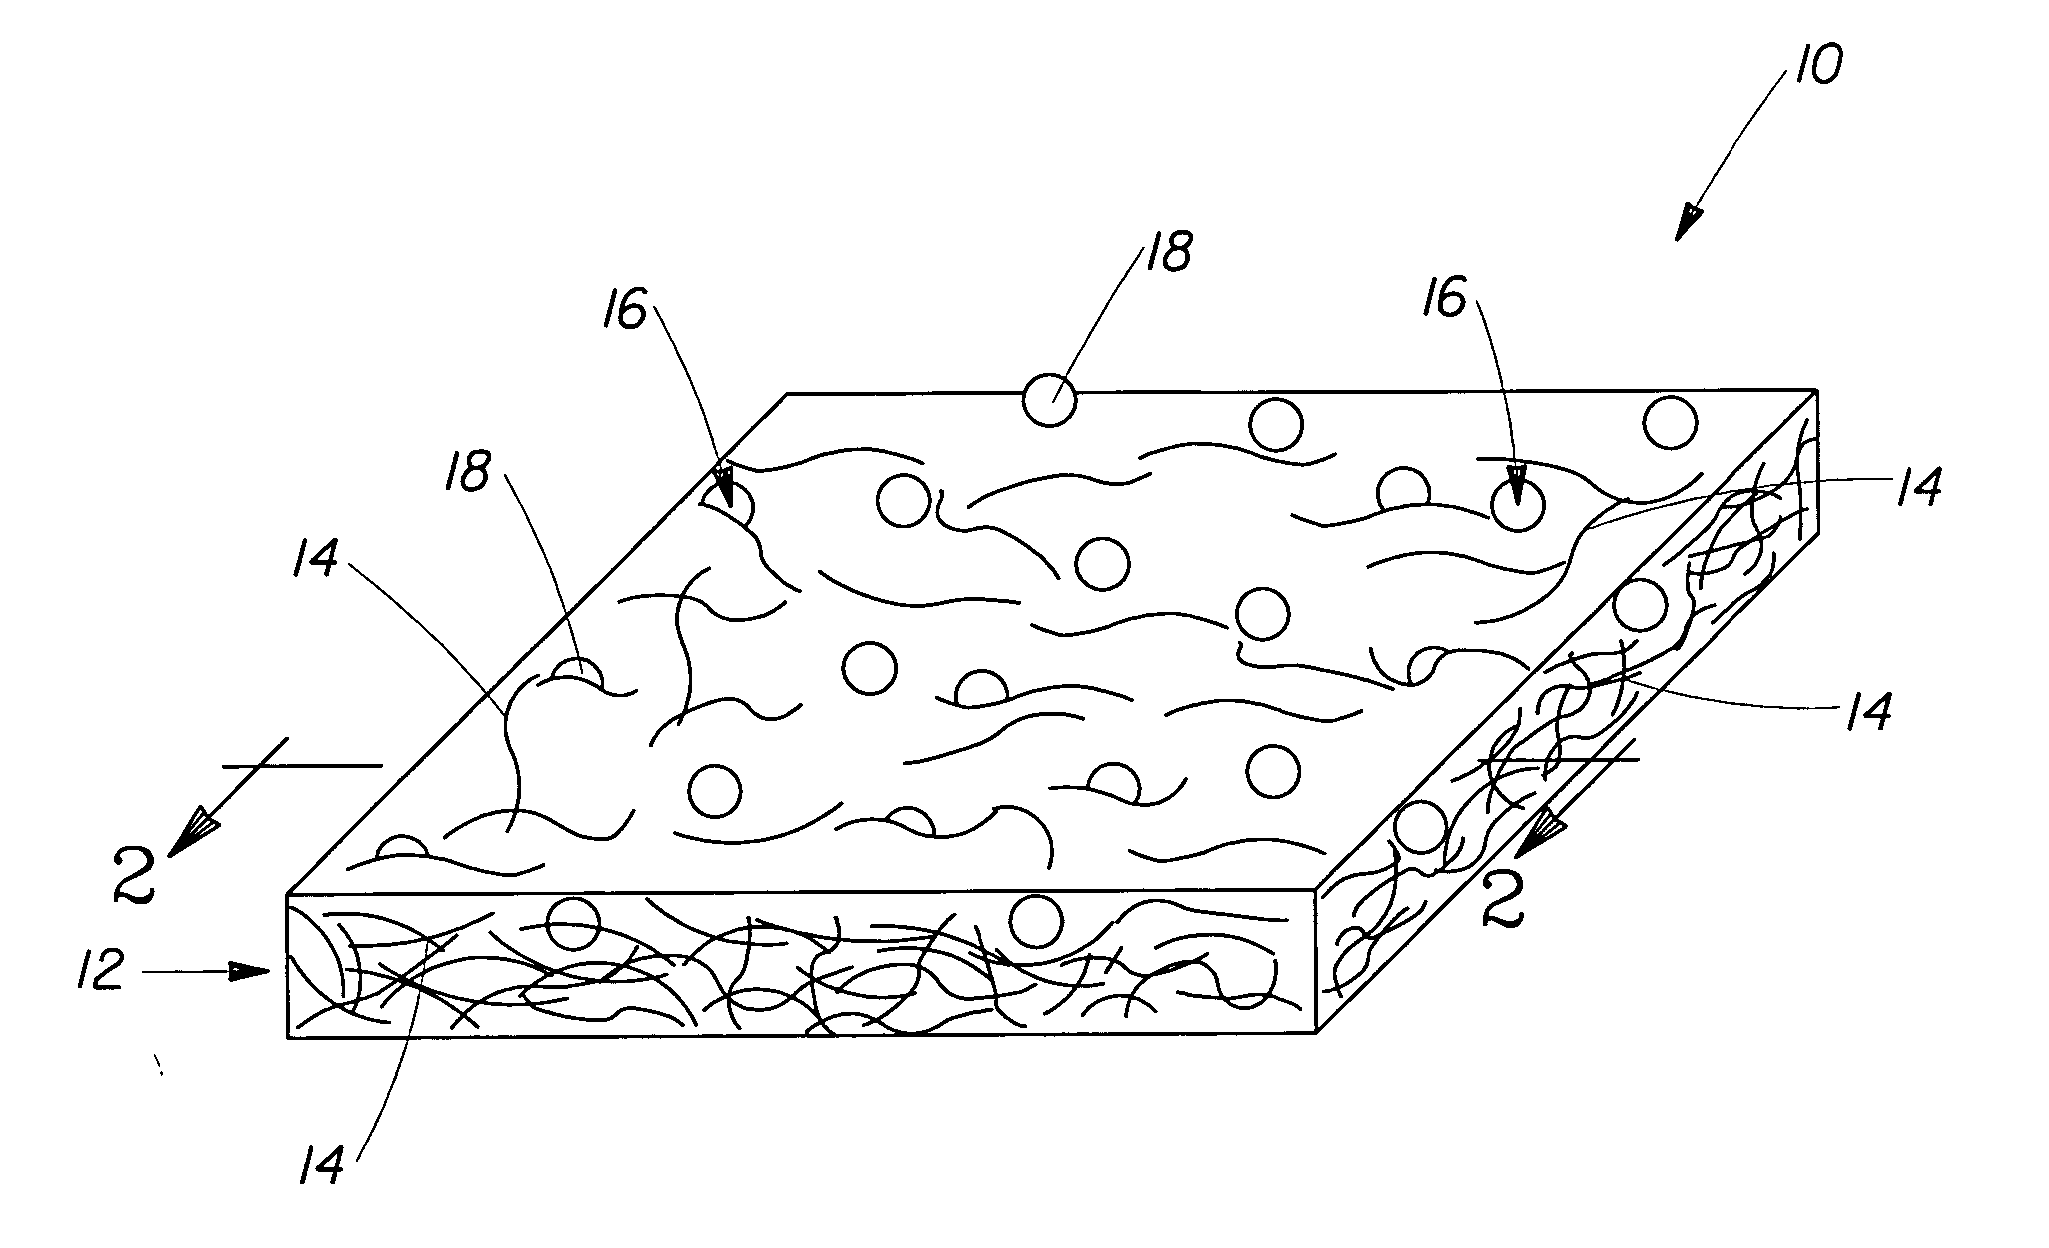 Fibrous structures comprising a low surface energy additive